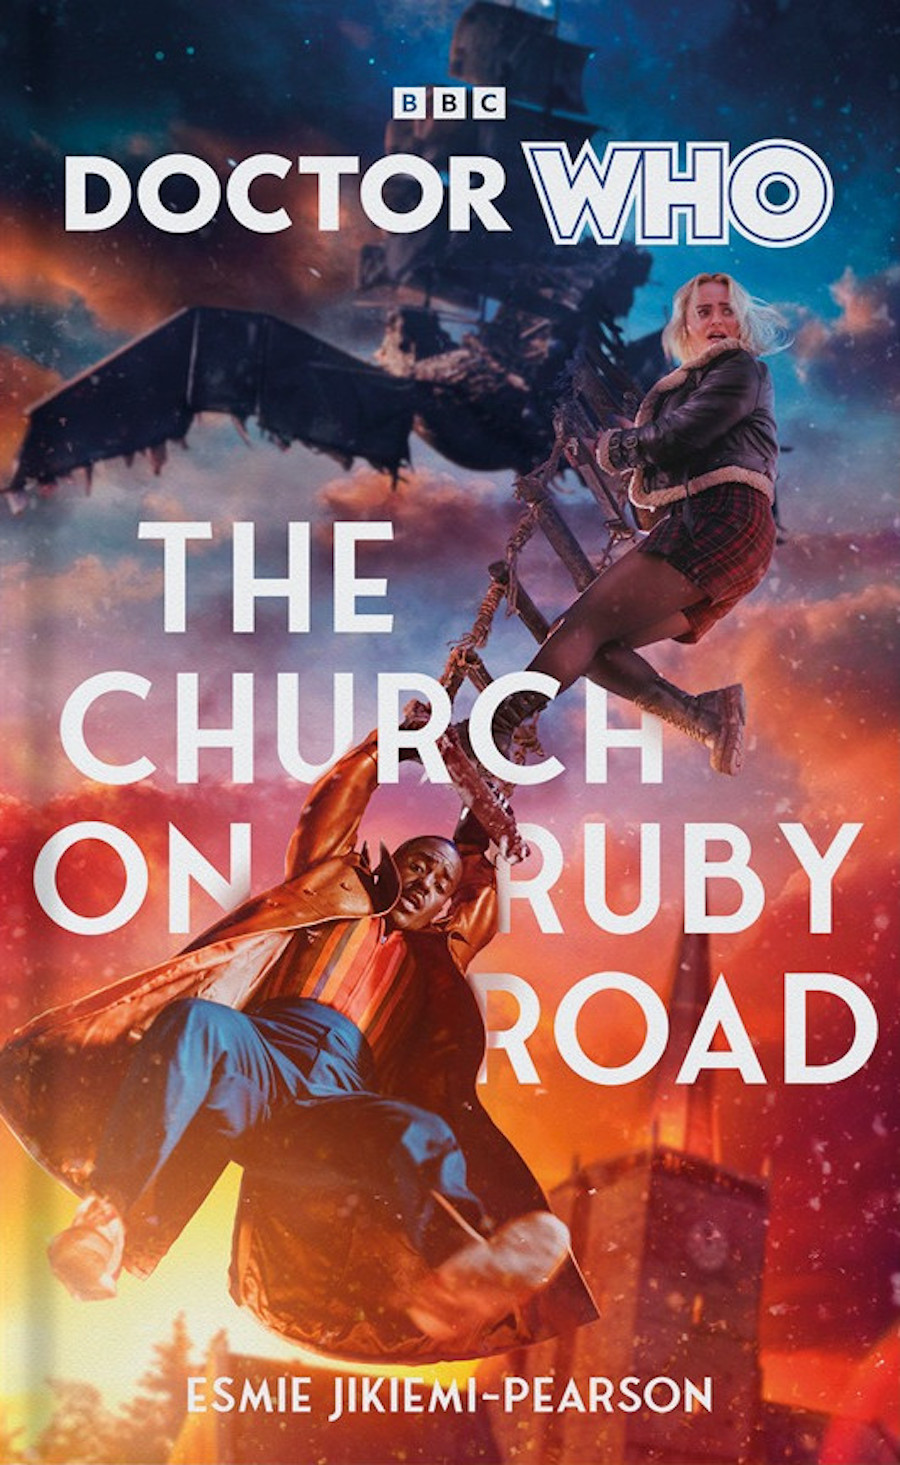 The Church on Ruby Road Novelisation><br />
The Church on Ruby Road Novelisation</h6>
<p></center></p>
<p><strong>“I’ve been waiting, all this time, for my life to begin. Maybe it’s time to stop waiting. Maybe it’s time to start living.”</strong></p>
<p>Chance. Misfortune. Coincidence. These are the weapons of choice for The Doctor’s latest enemies. And those enemies are very, very hungry…</p>
<p>For <a href=